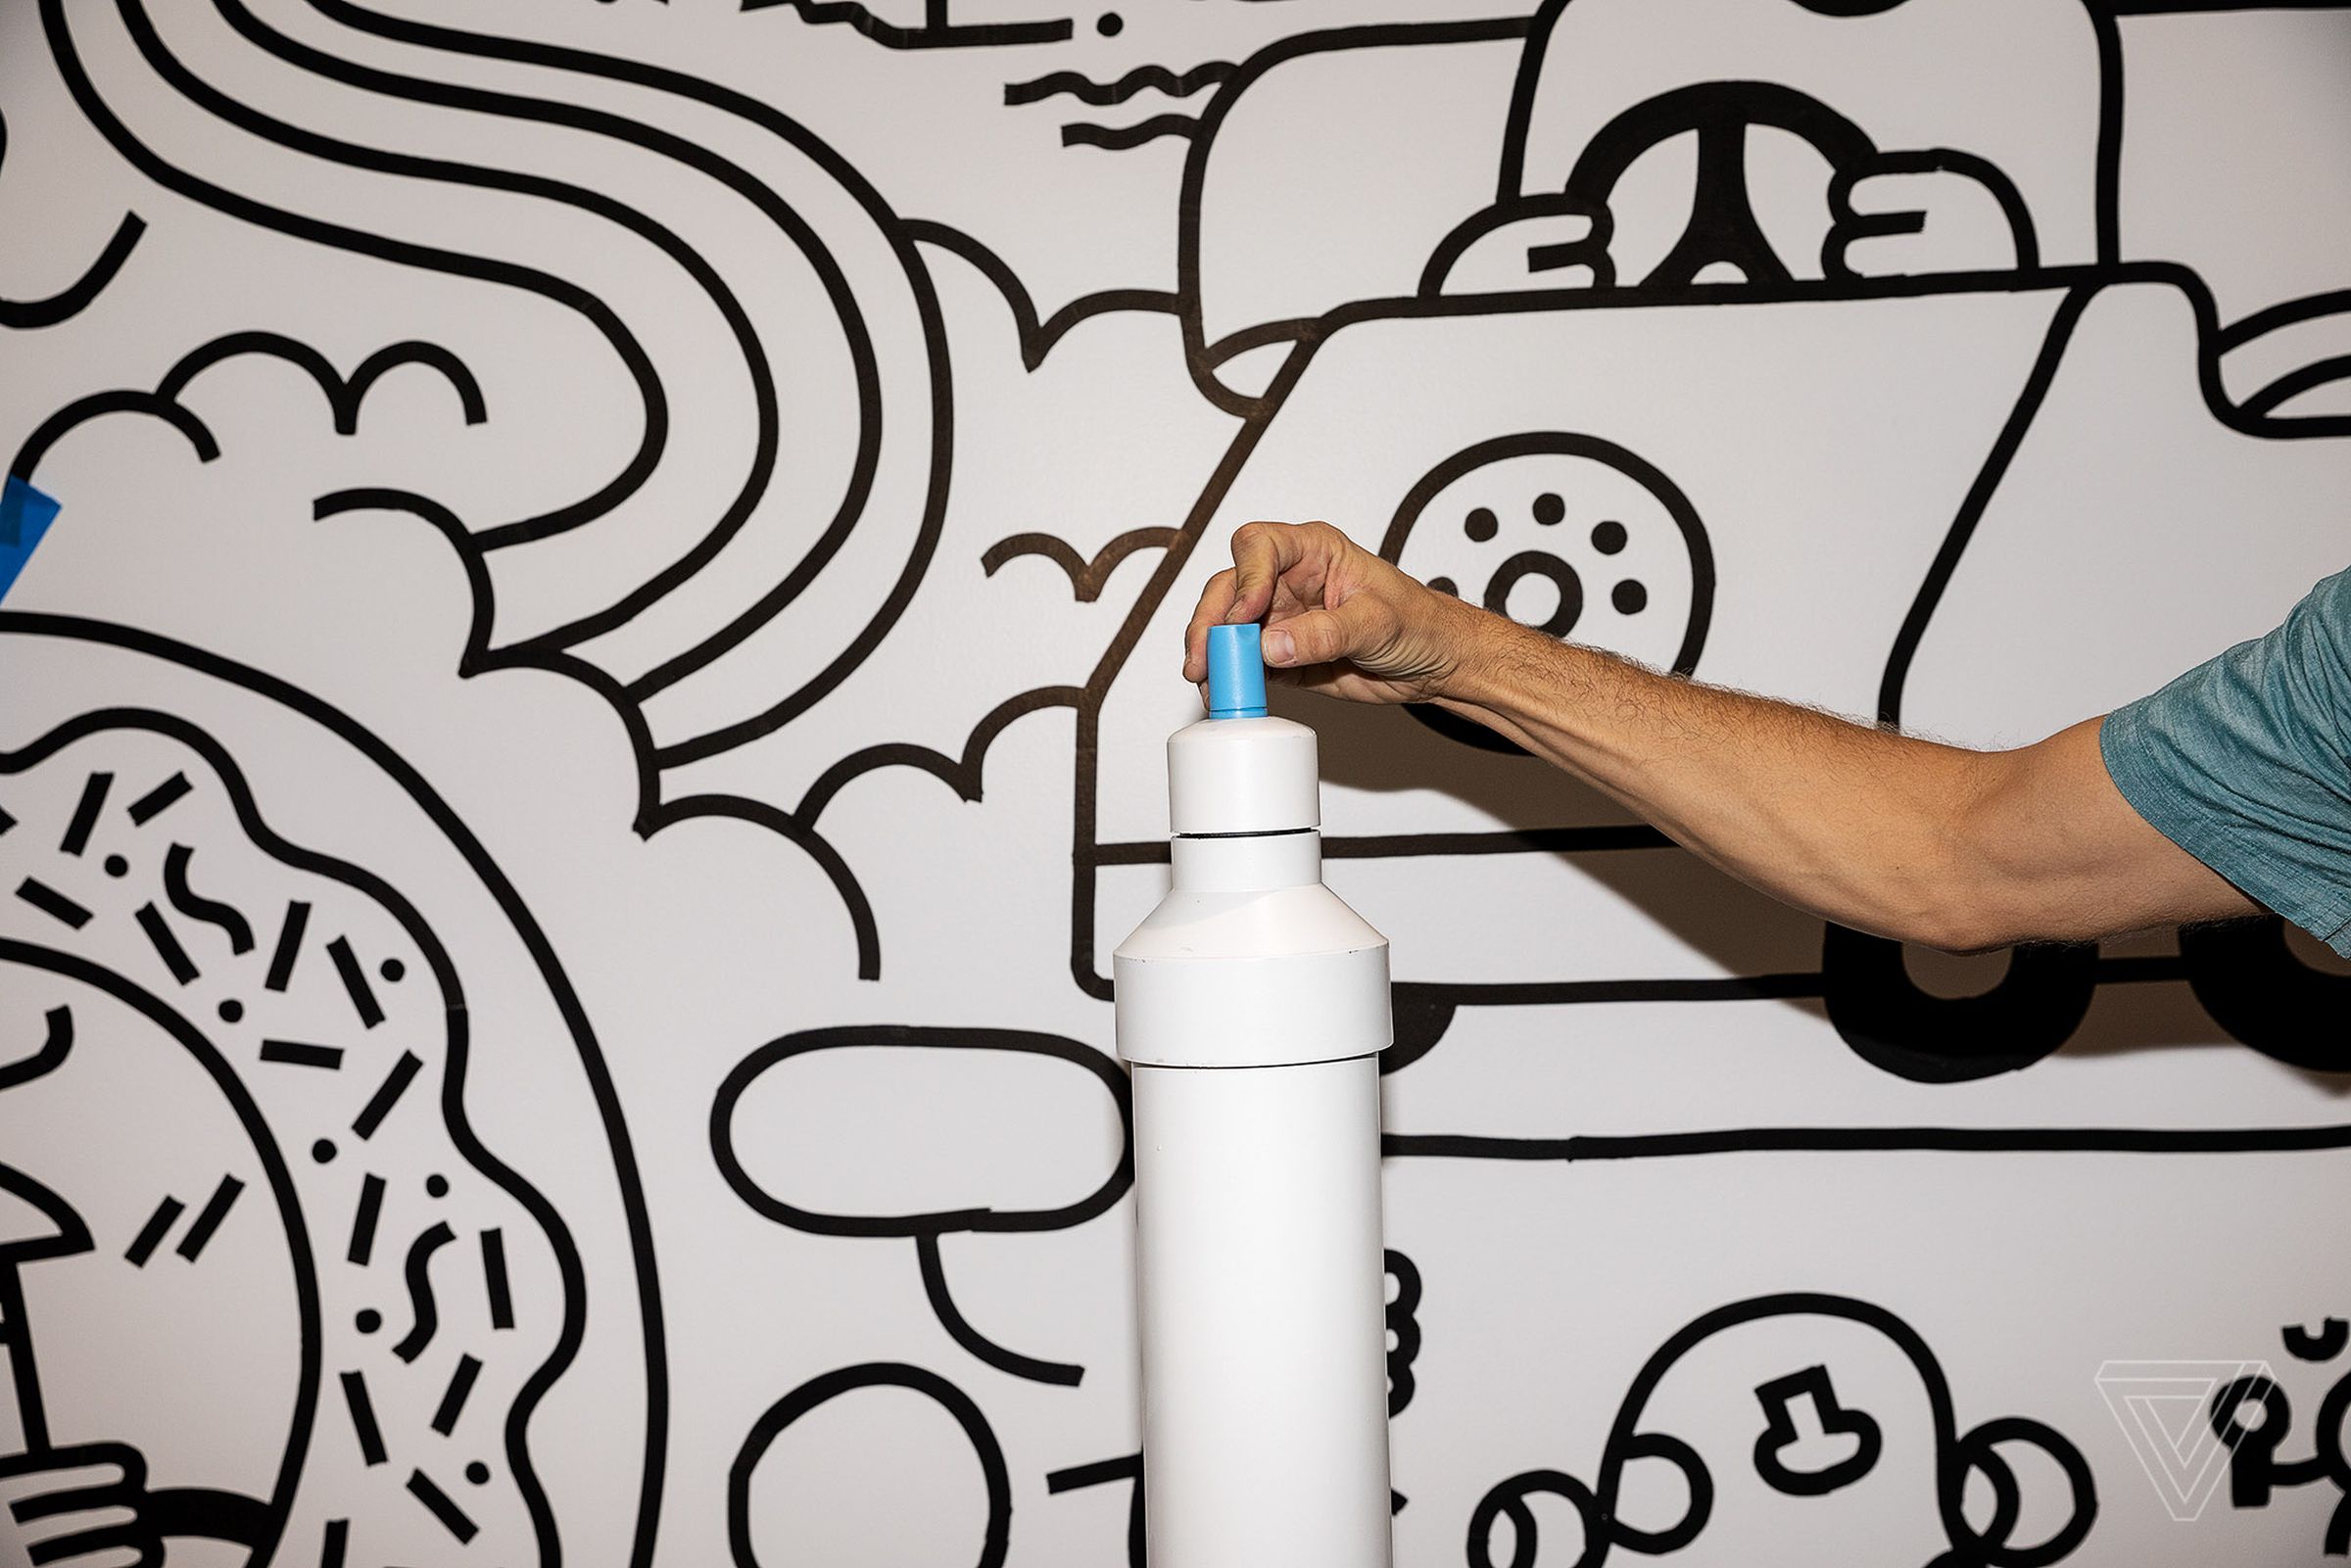 Jeff Lind poses with an oversized marker, which is part of the “Color Me ___” room by Andrew Neyer and Andy J. Pizza.